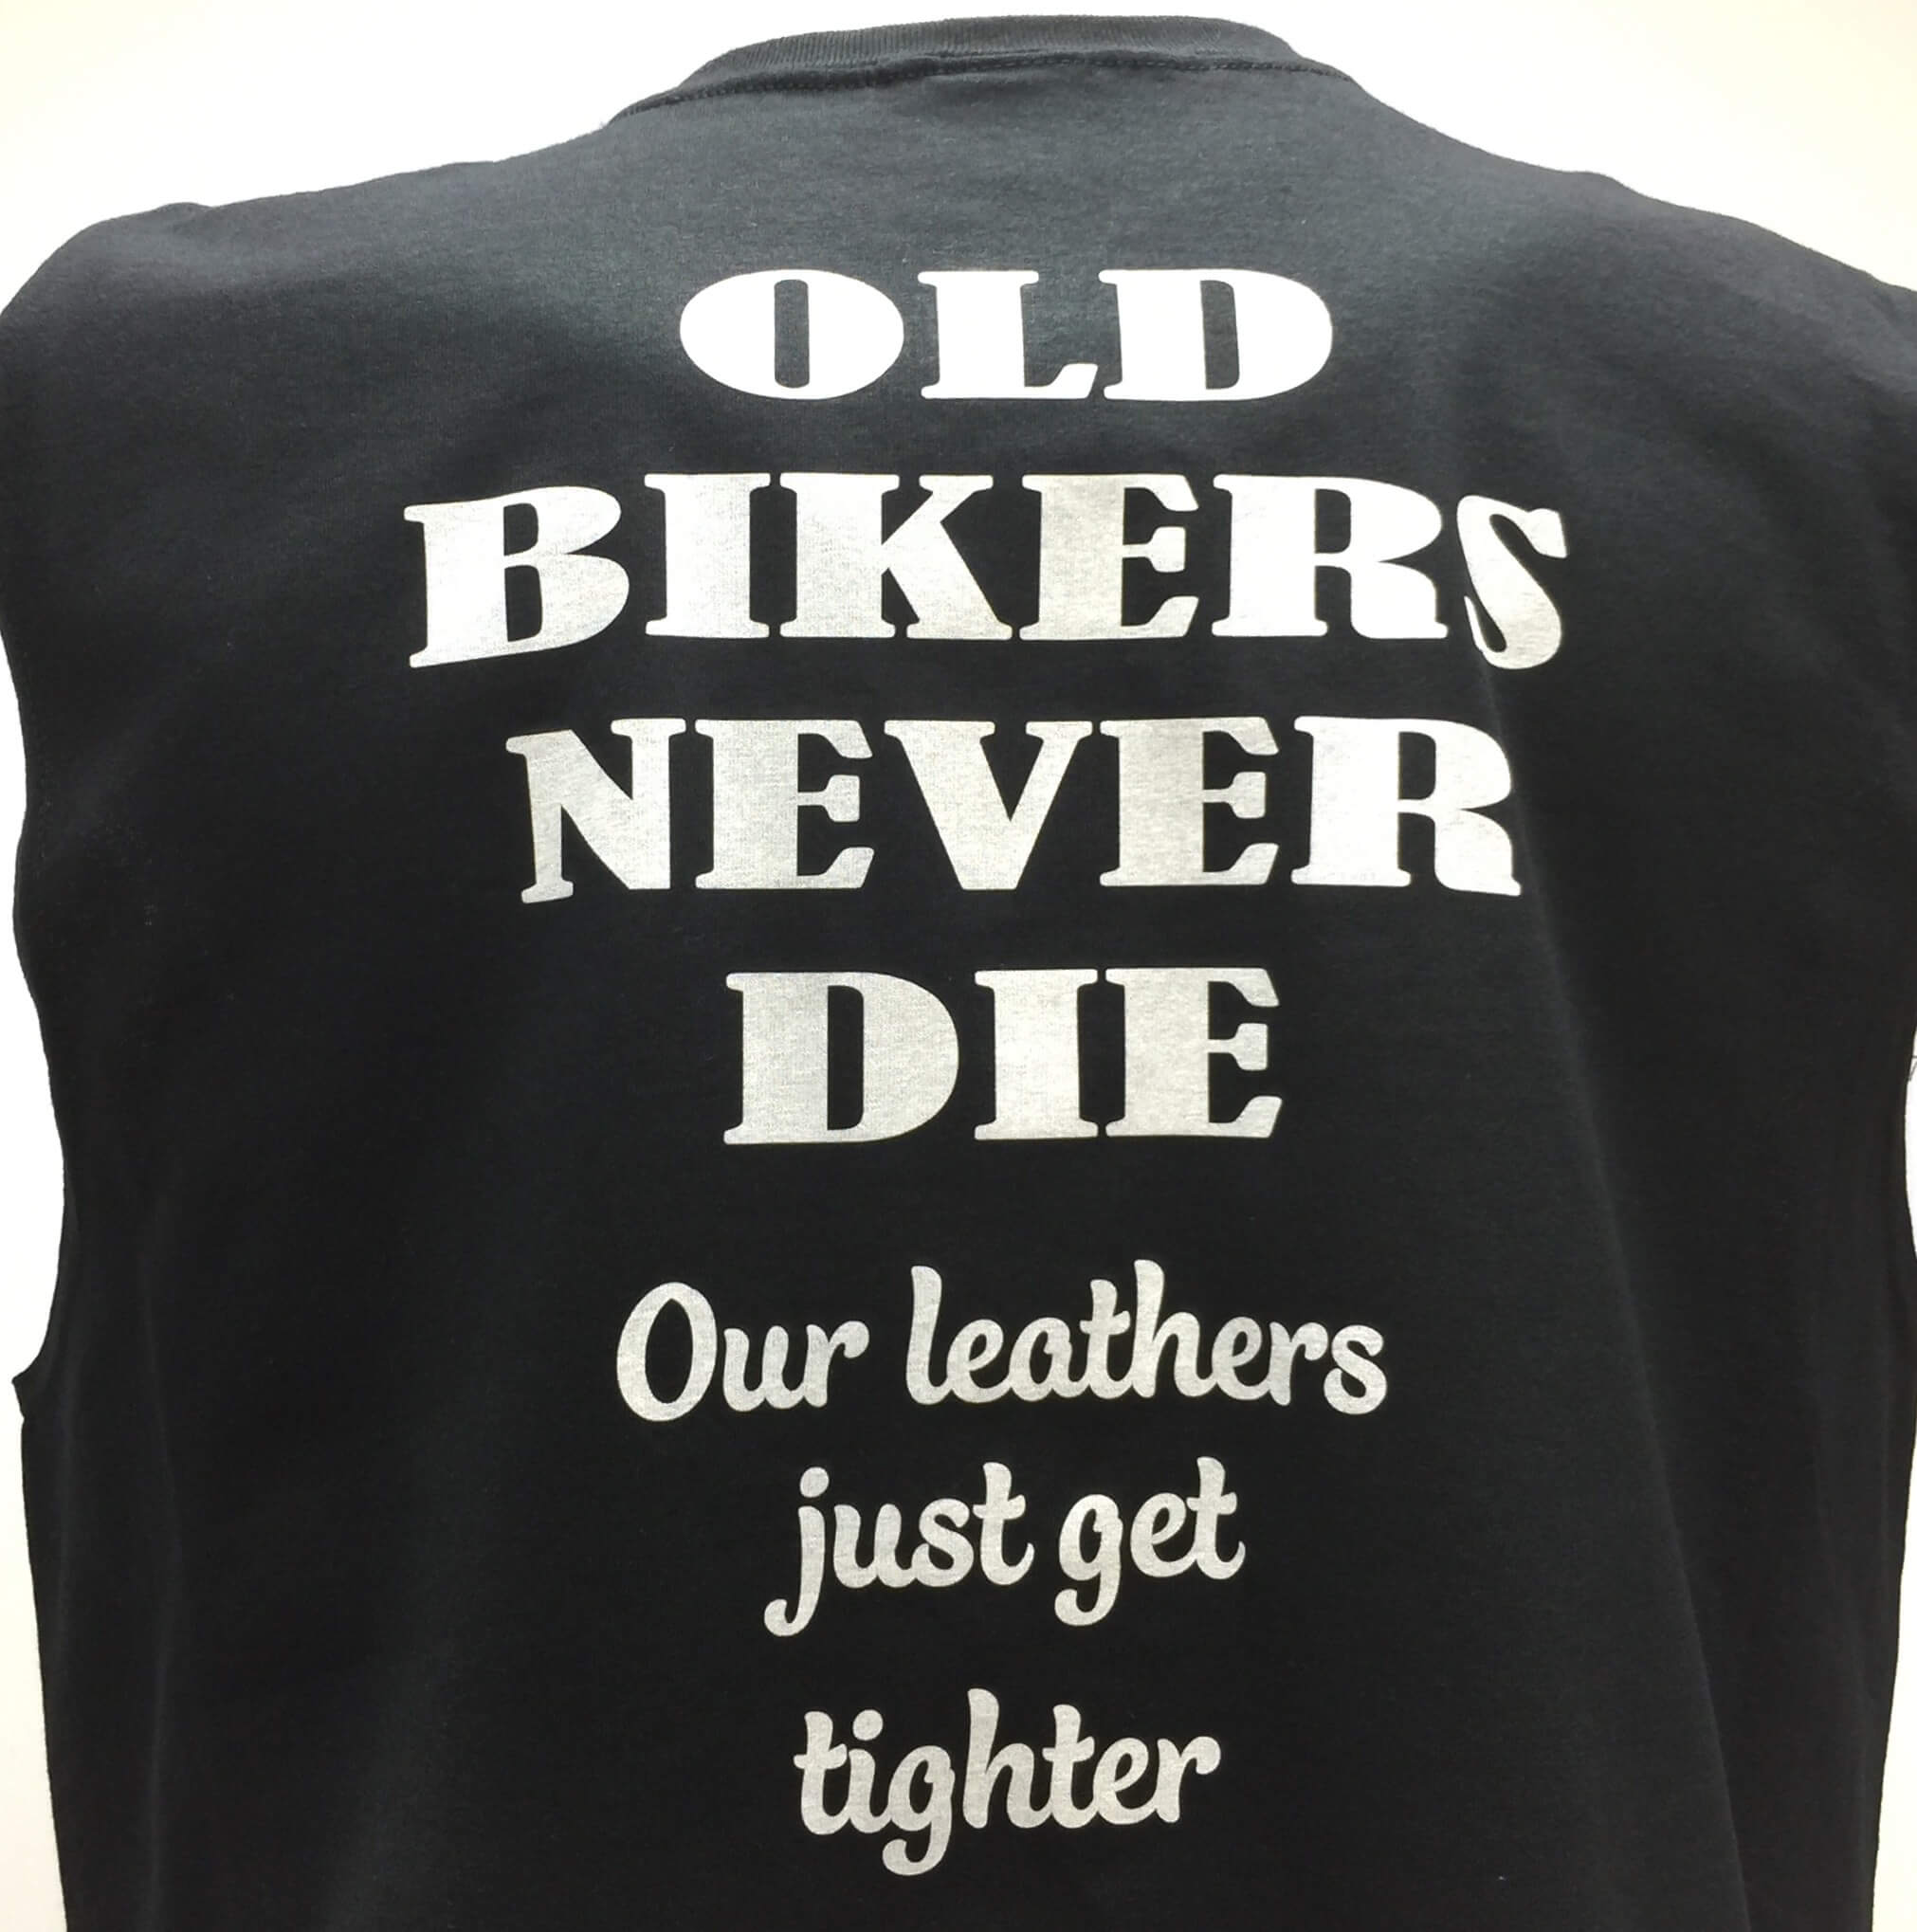 old-bikers-never-die-our-leathers-just-get-tighter-shirt.jpg